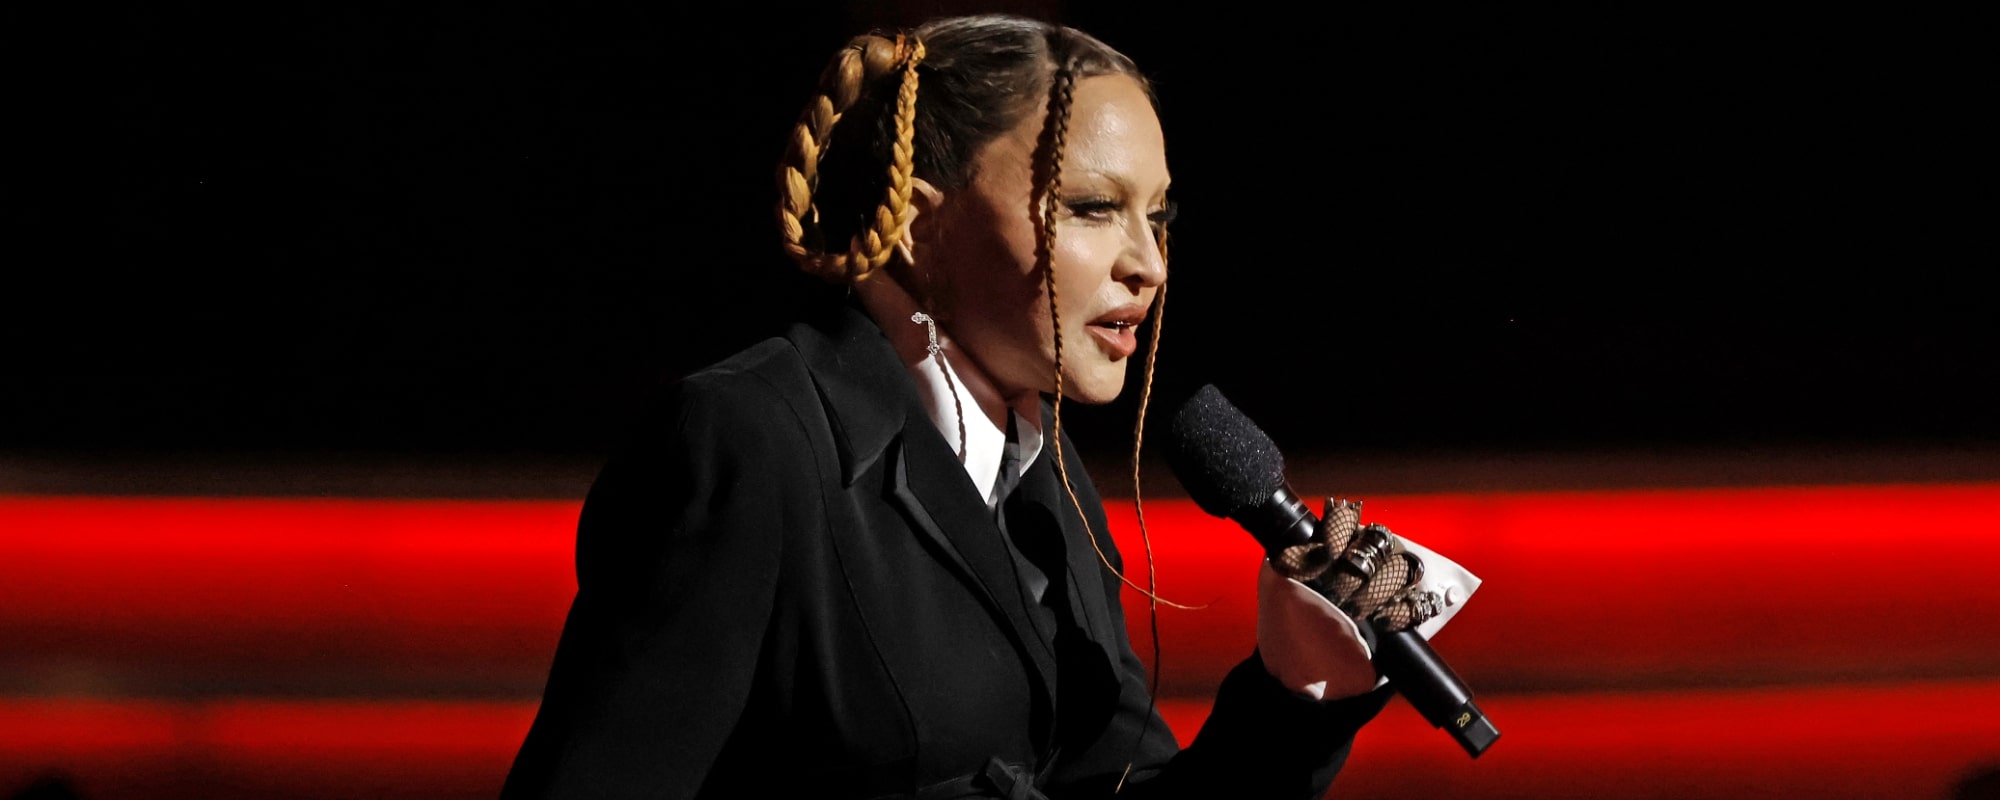 Madonna Breaks Silence Over Fans Lawsuit, Will Defend Herself “Vigorously”